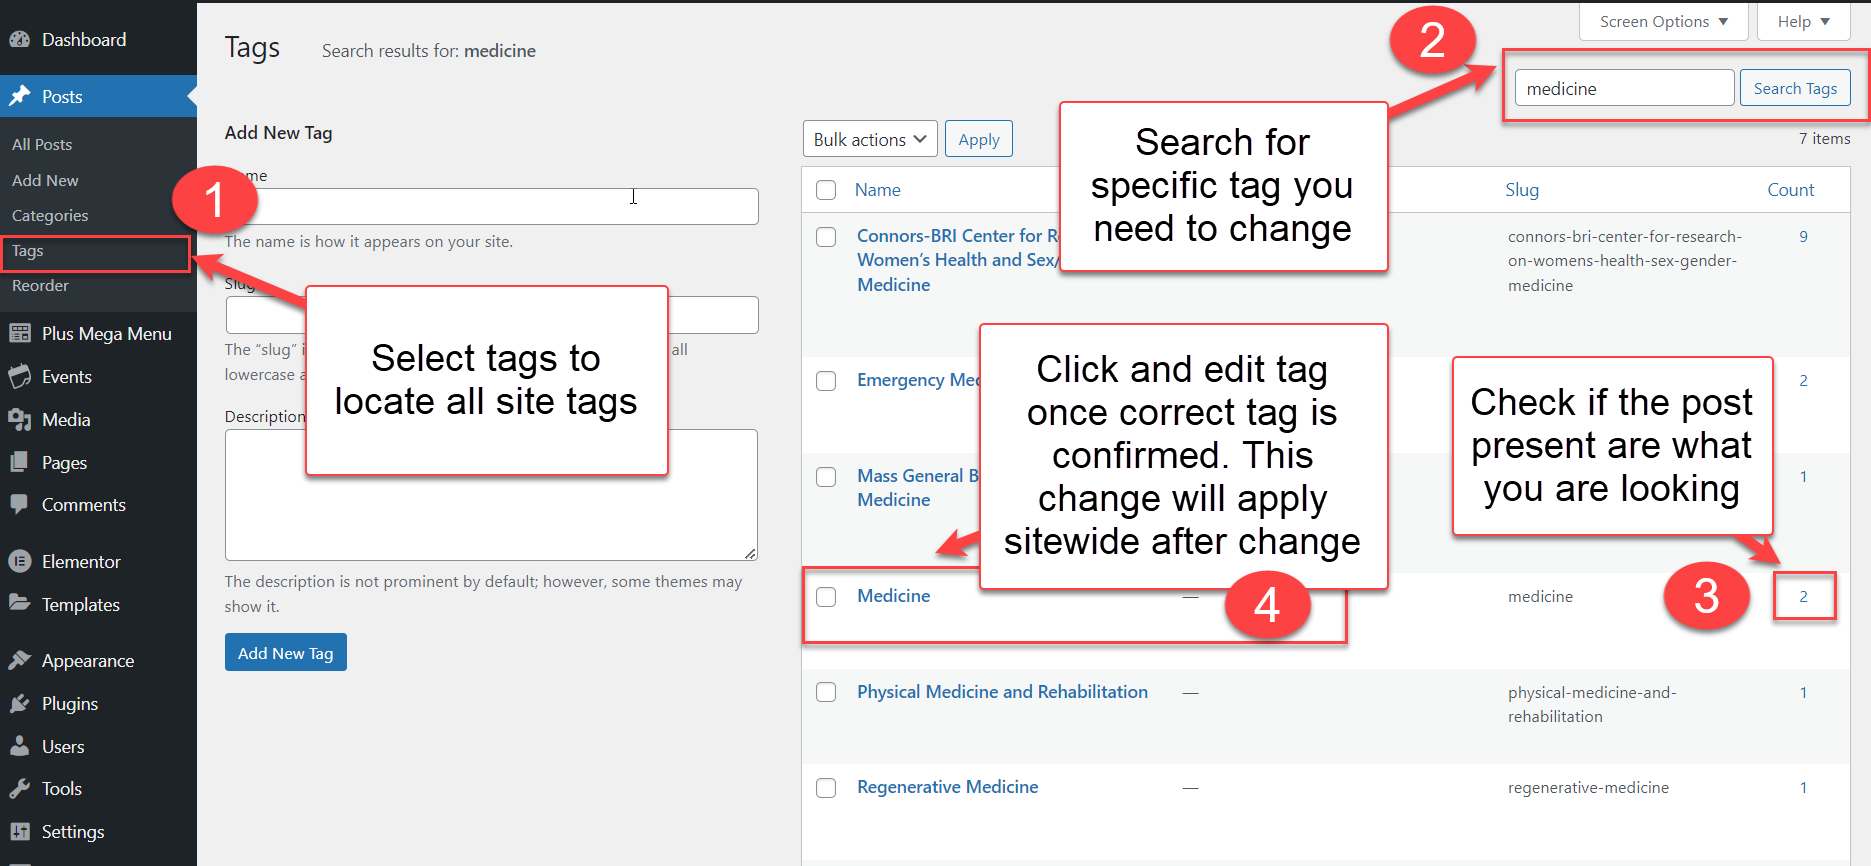 ROC Page - Renaming Tags or Categories - 4